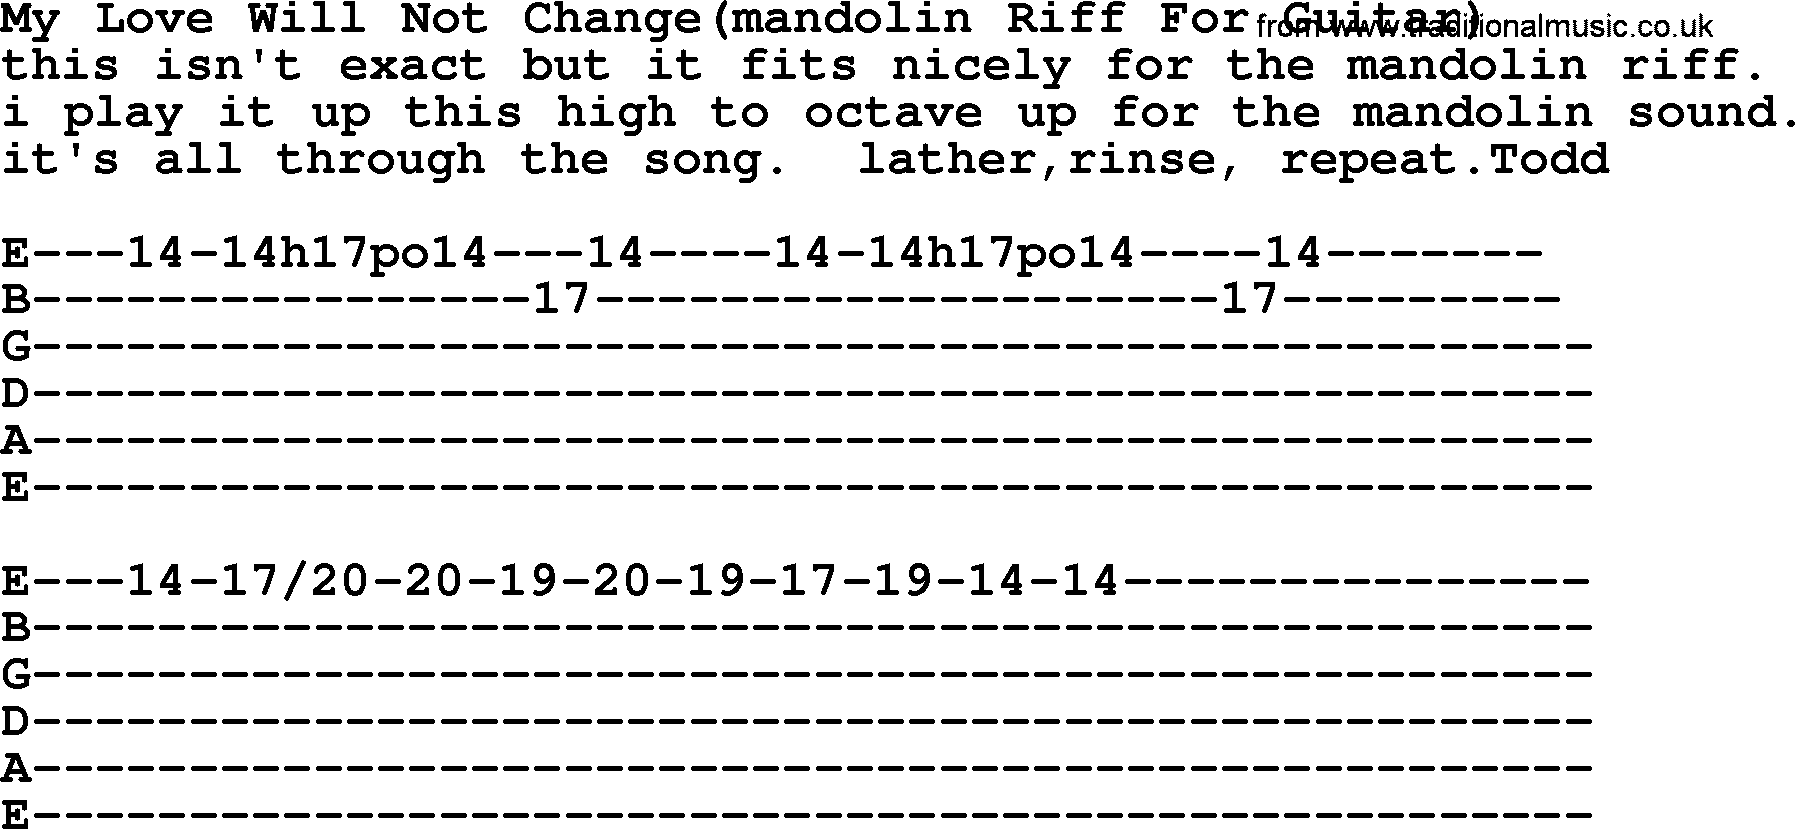 Bluegrass song: My Love Will Not Change(Riff For Guitar), lyrics and chords